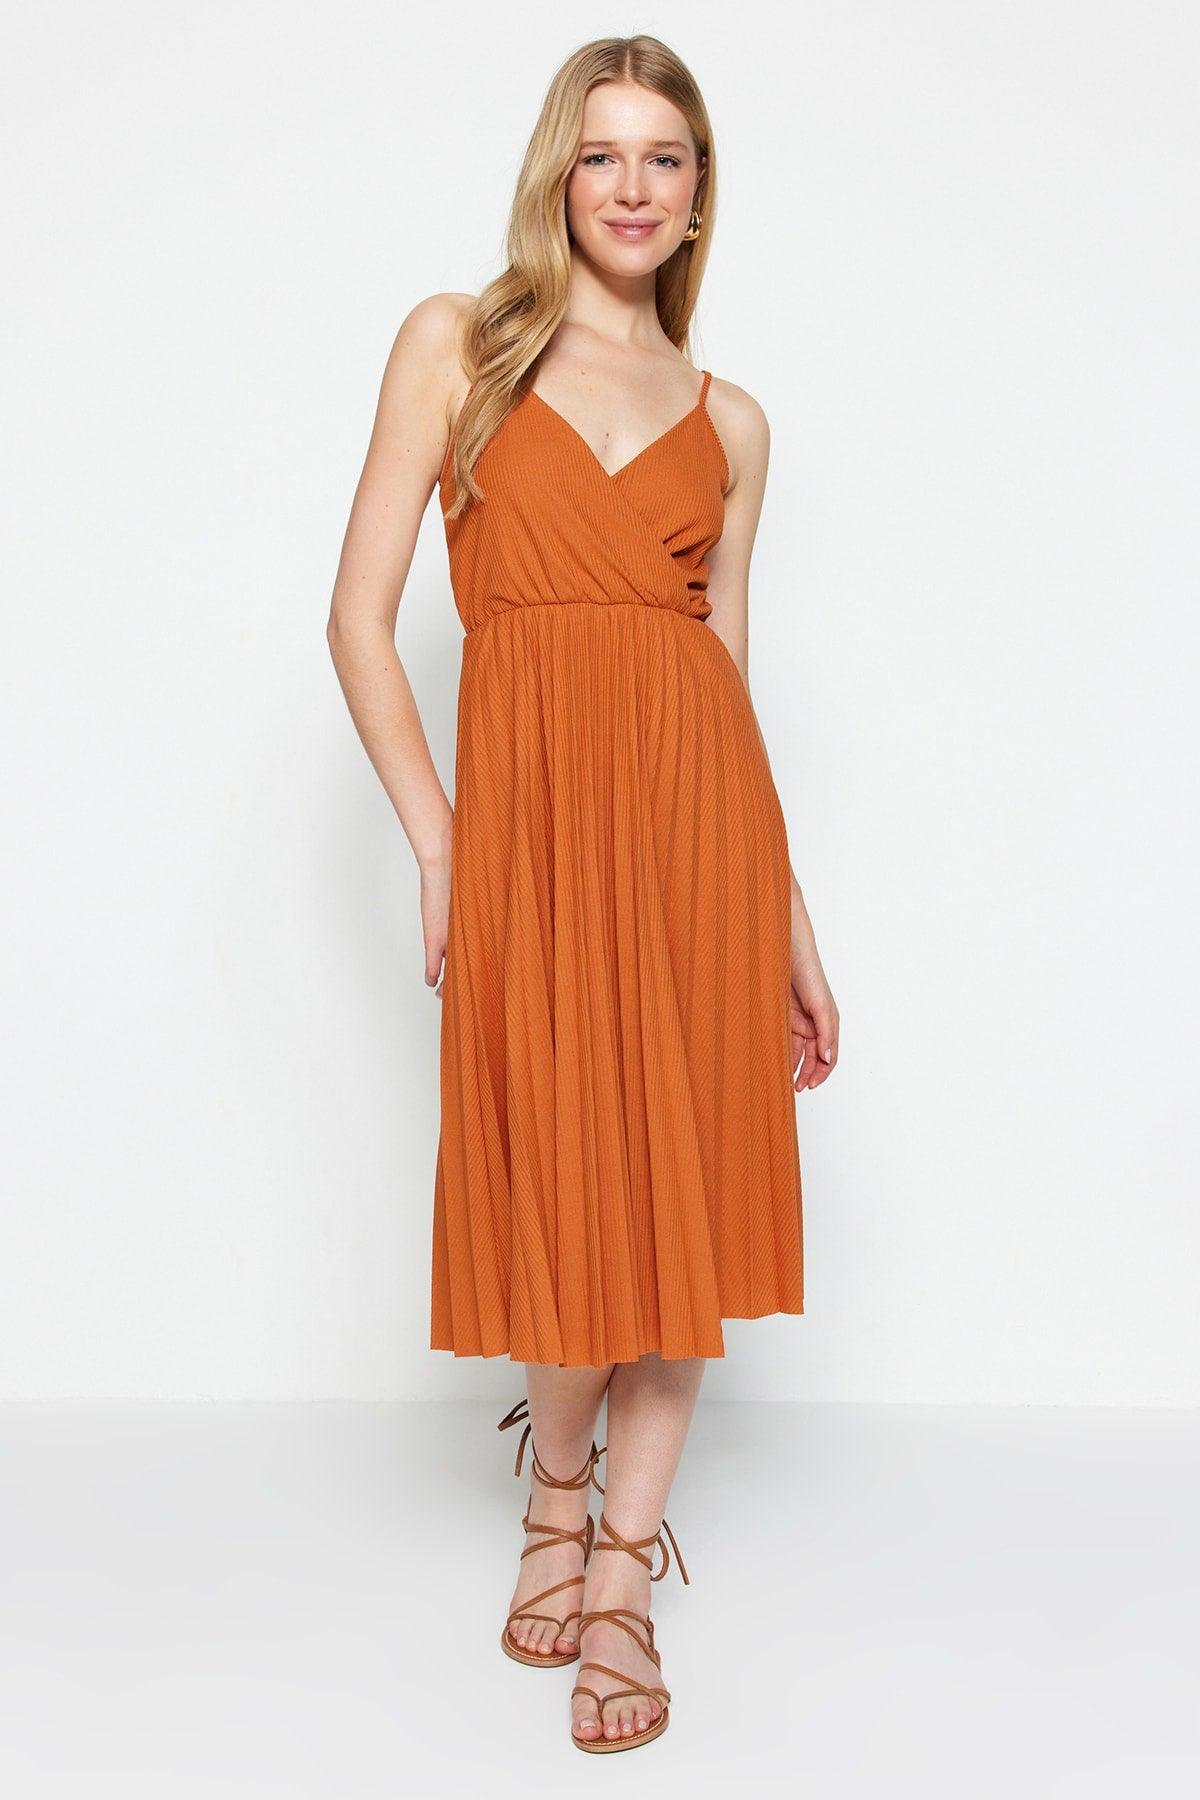 Cinnamon Waist Drop/Skater Midi Double Breasted Pleated Strap Stretch Knitted Dress TWOSS20EL2729 - Swordslife